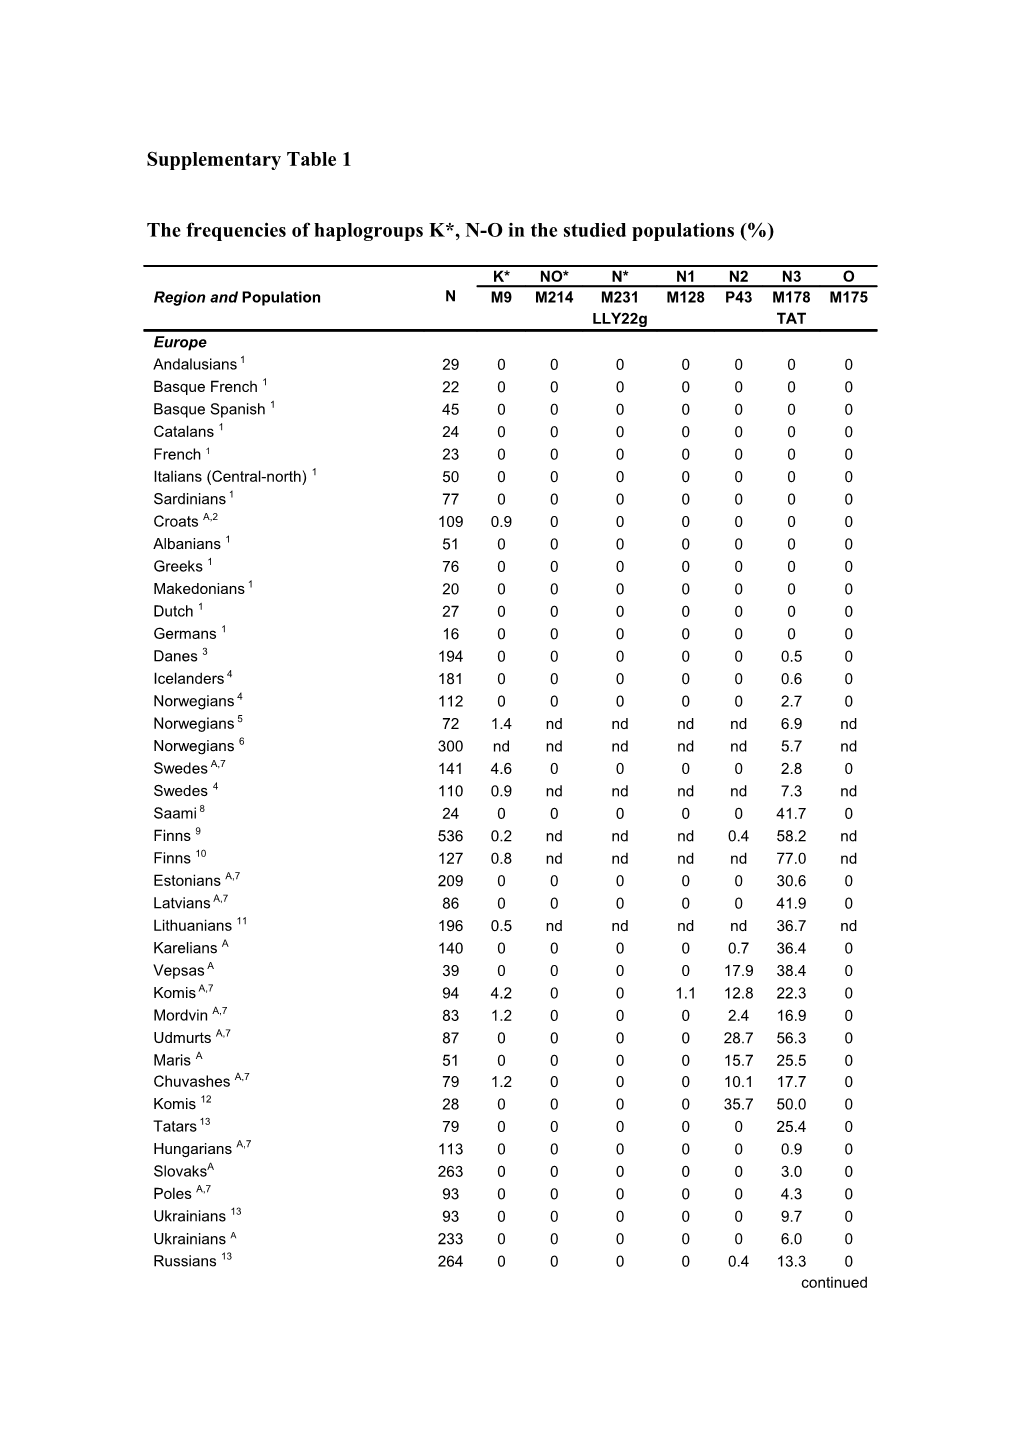 The Frequencies of Haplogroups K*, N-O in the Studied Populations (%)